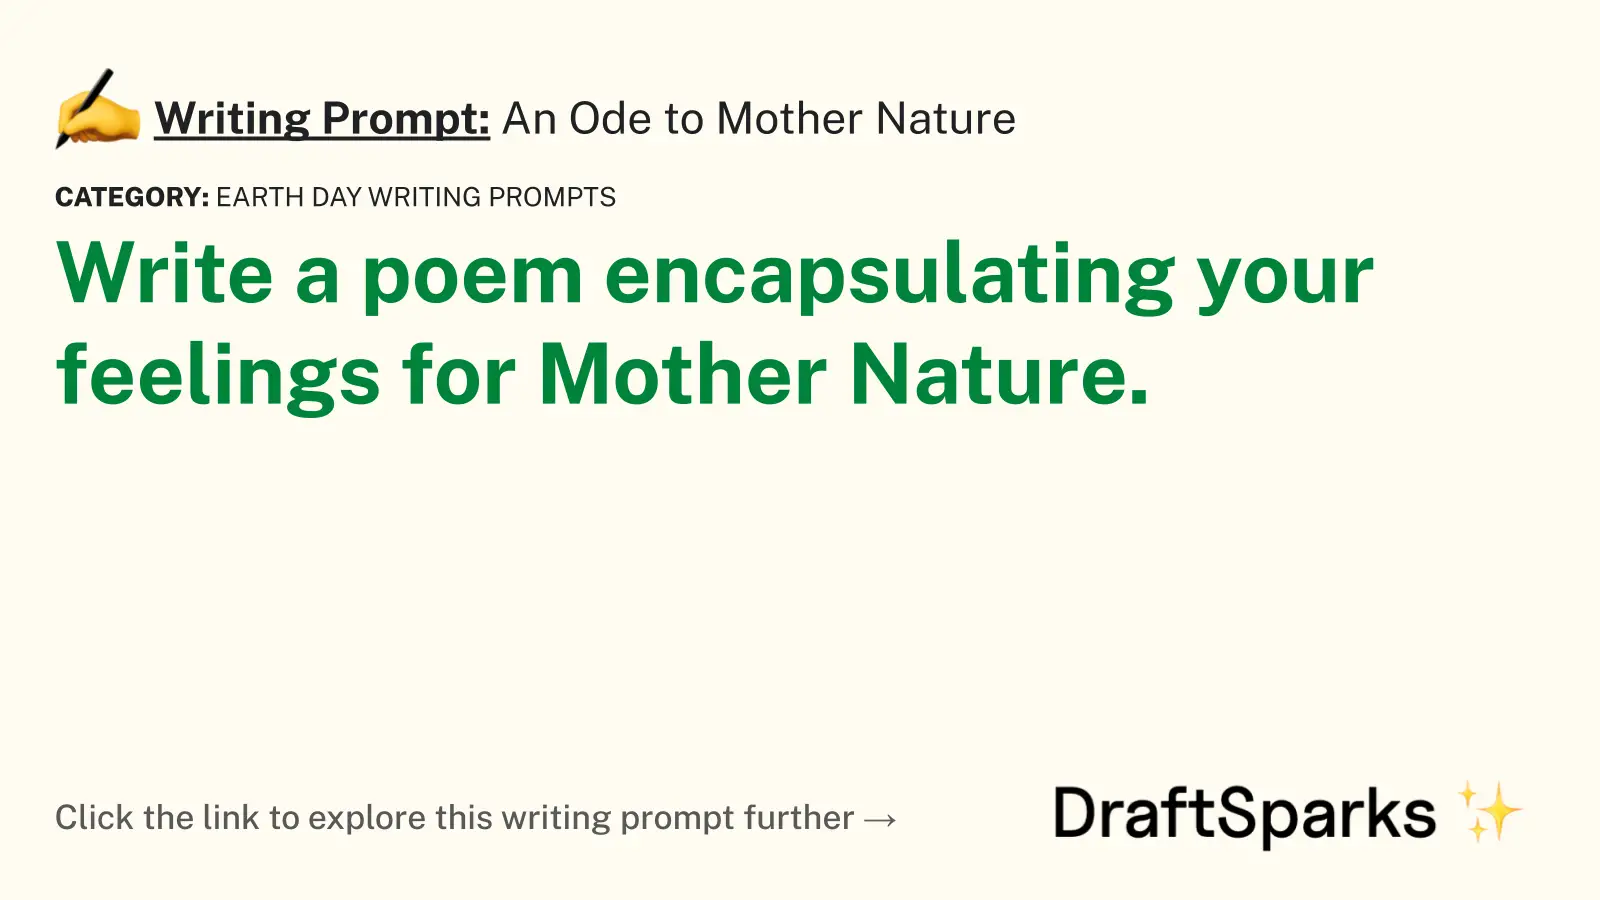 An Ode to Mother Nature